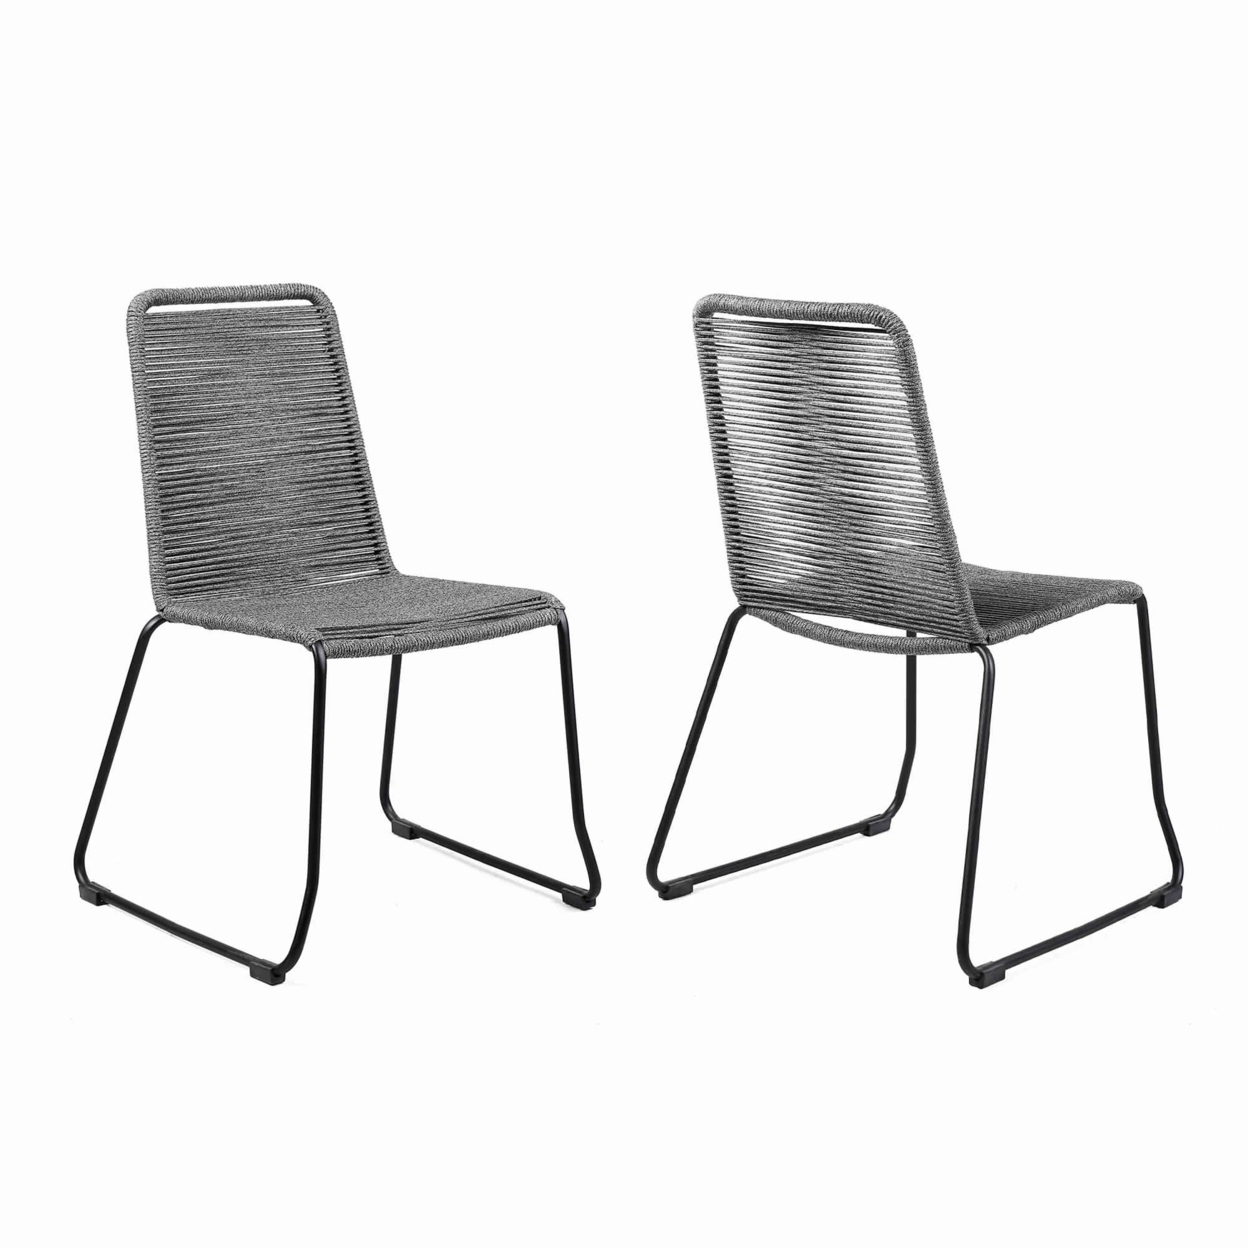 Metal Outdoor Dining Chair With Fishbone Weave, Set Of 2, Gray And Black- Saltoro Sherpi